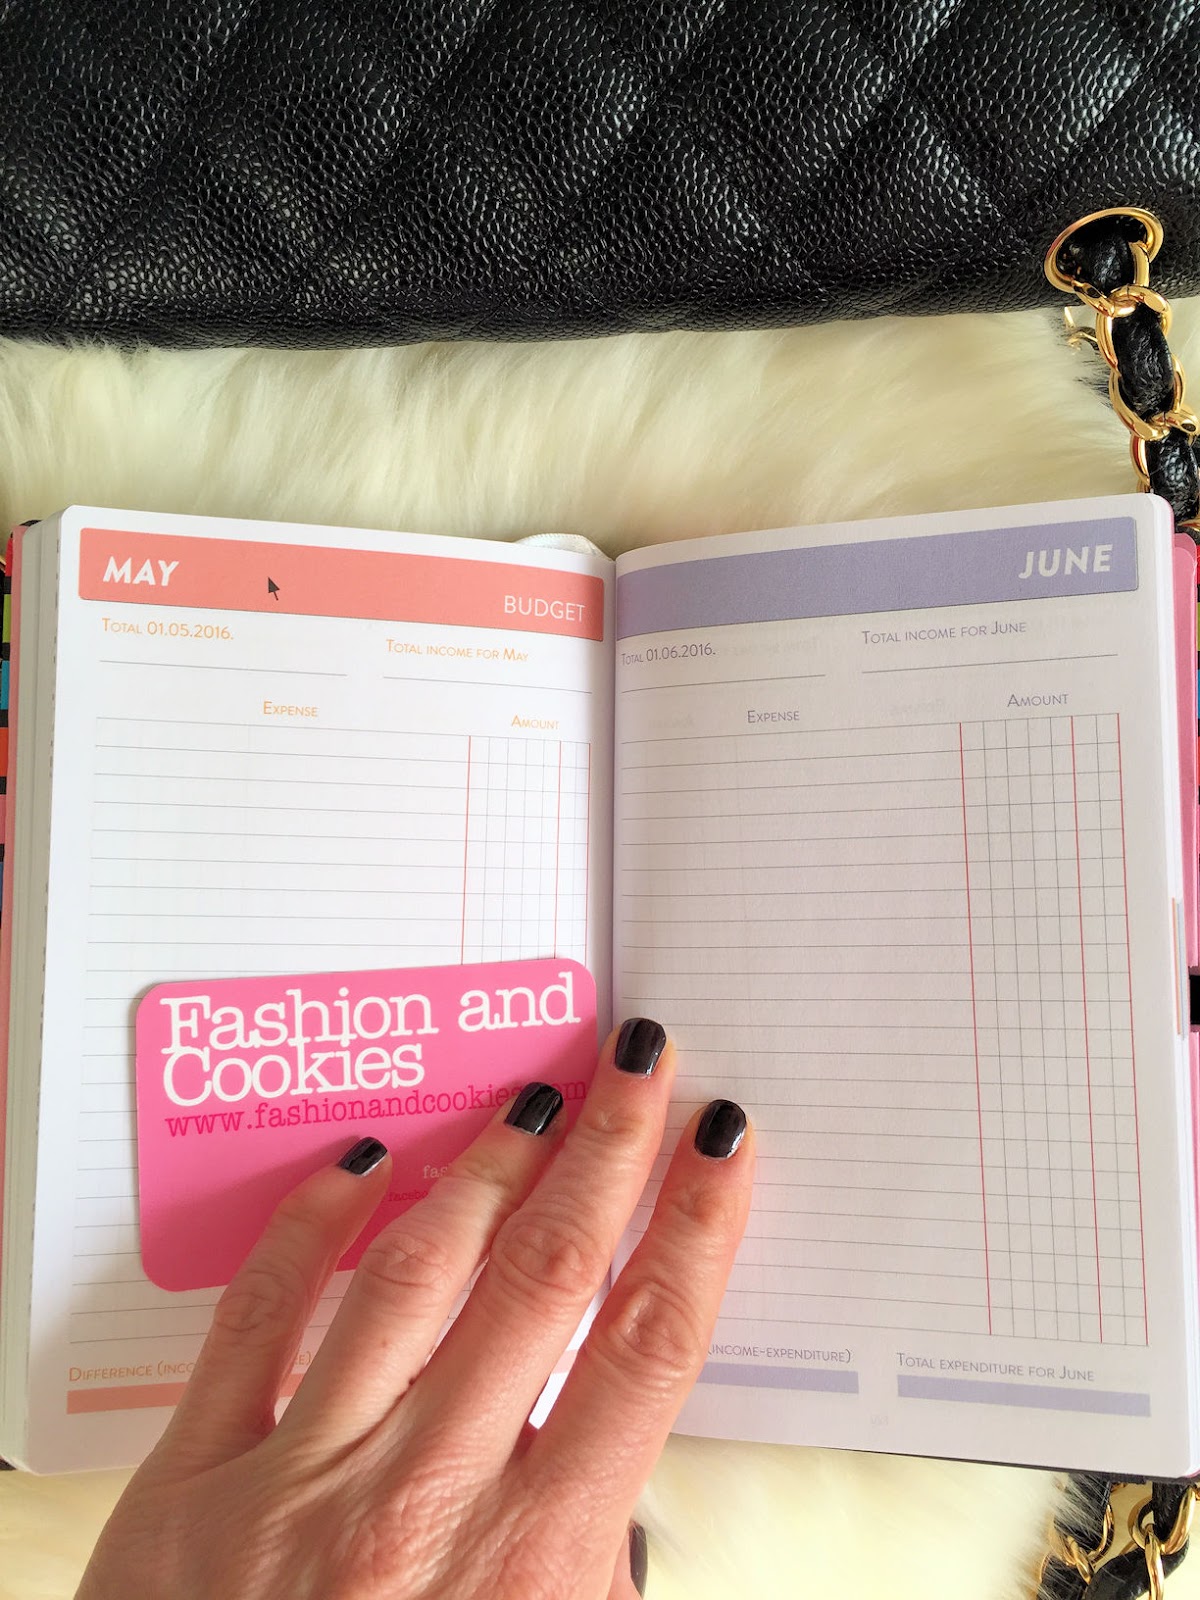 Believe in yourself women's planner 2016 on Fashion and Cookies fashion blog, fashion blogger